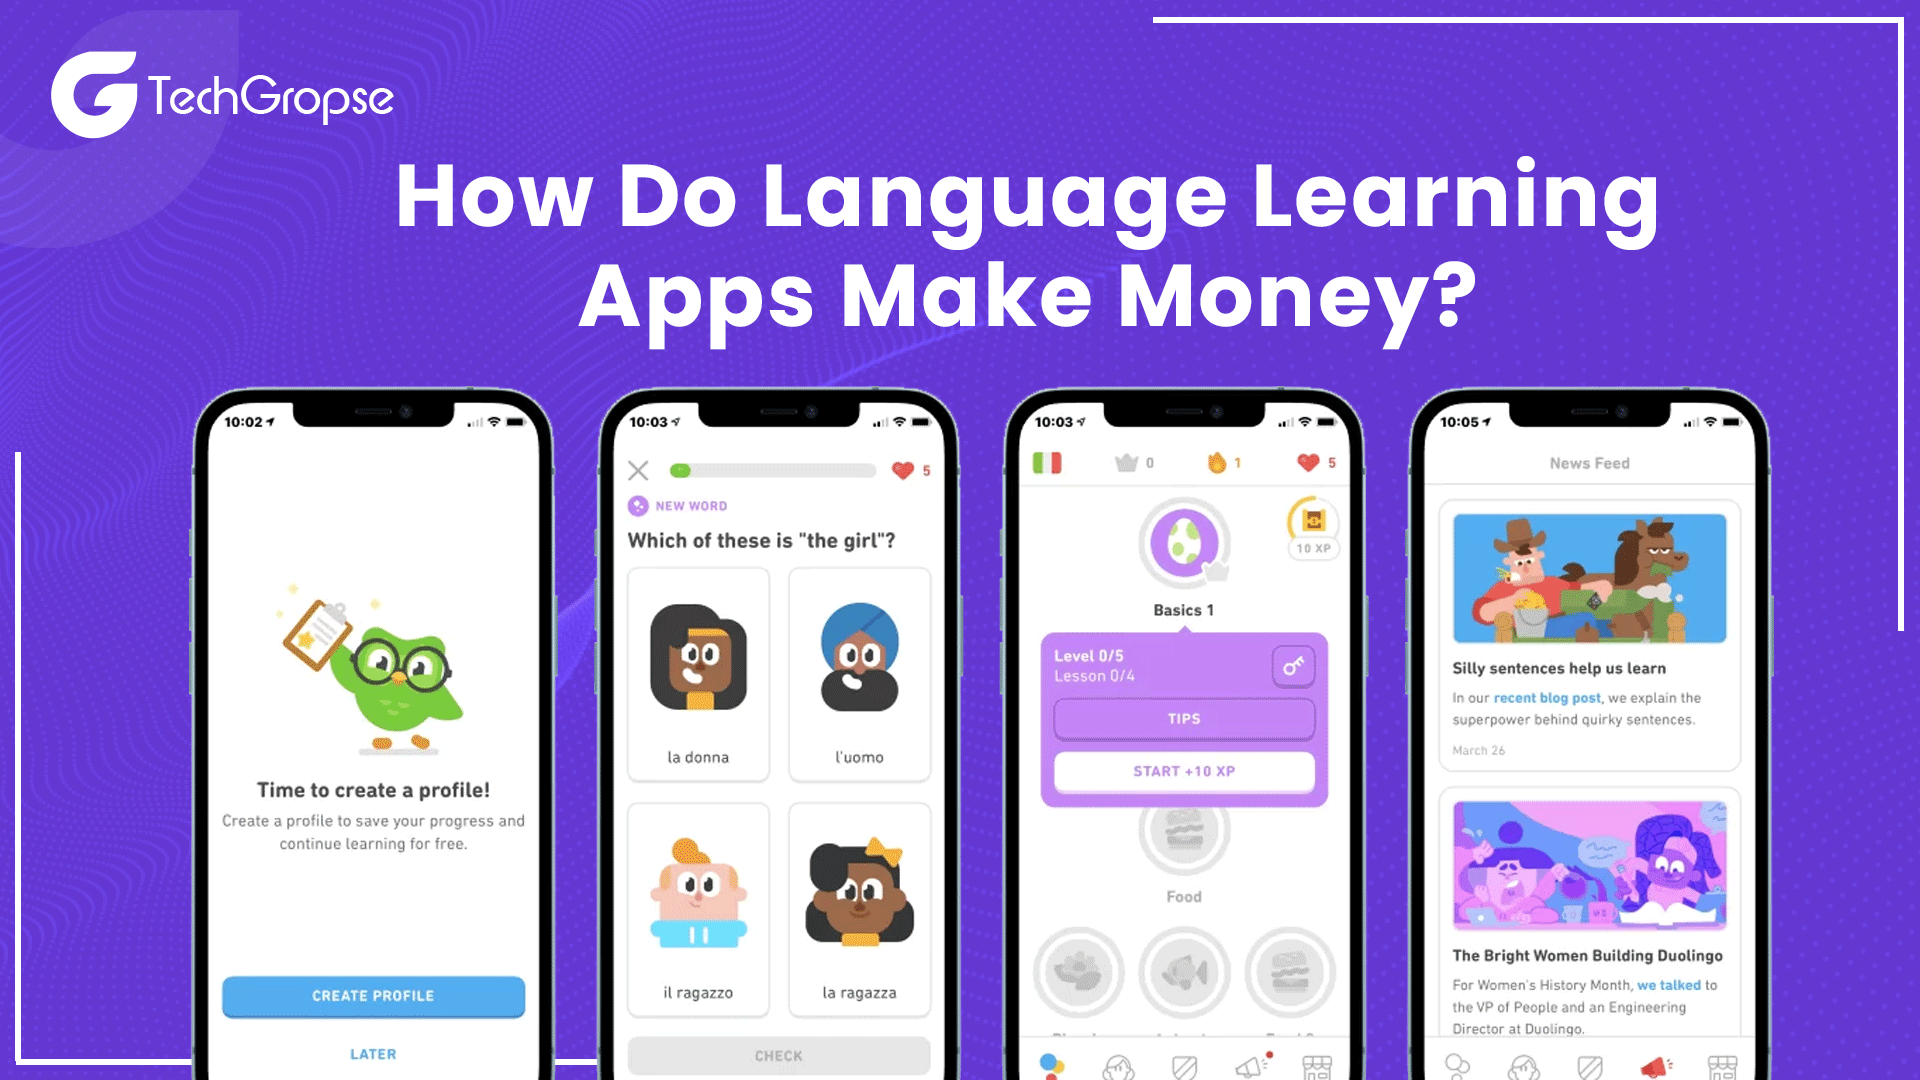 How Do Language Learning Apps Make Money?